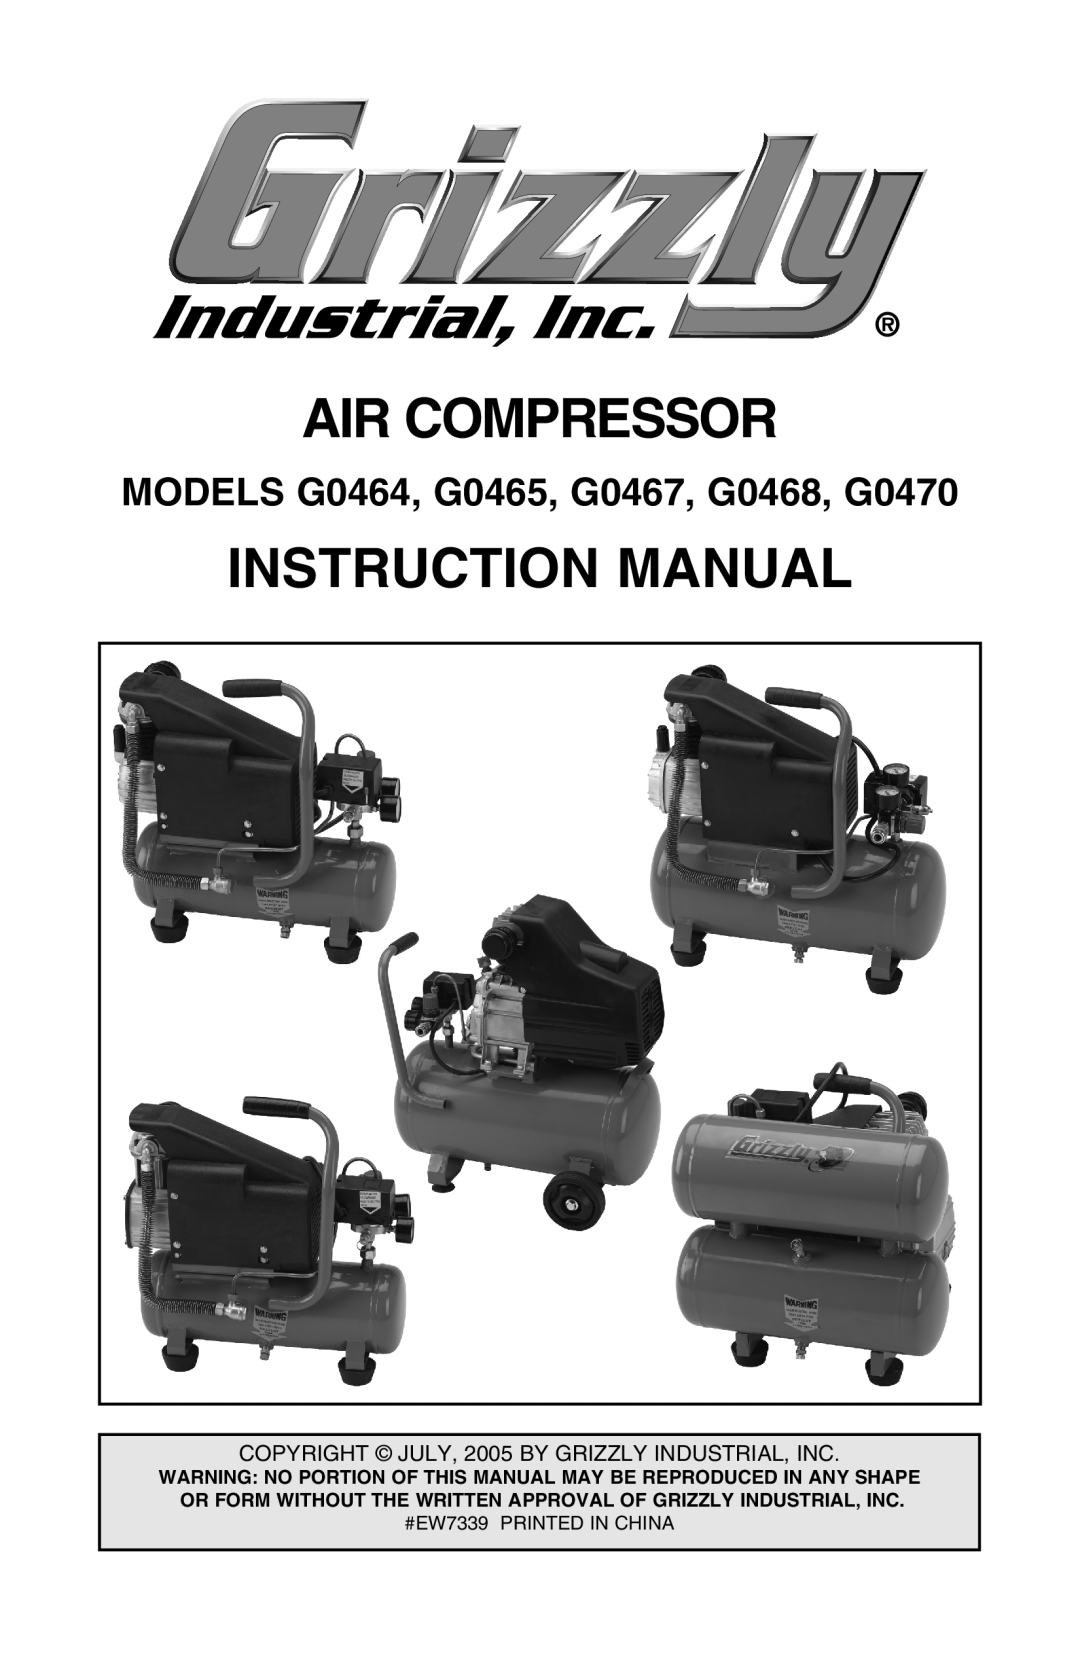 Grizzly G470 instruction manual MODELS G0464, G0465, G0467, G0468, G0470, Air Compressor, Instruction Manual 